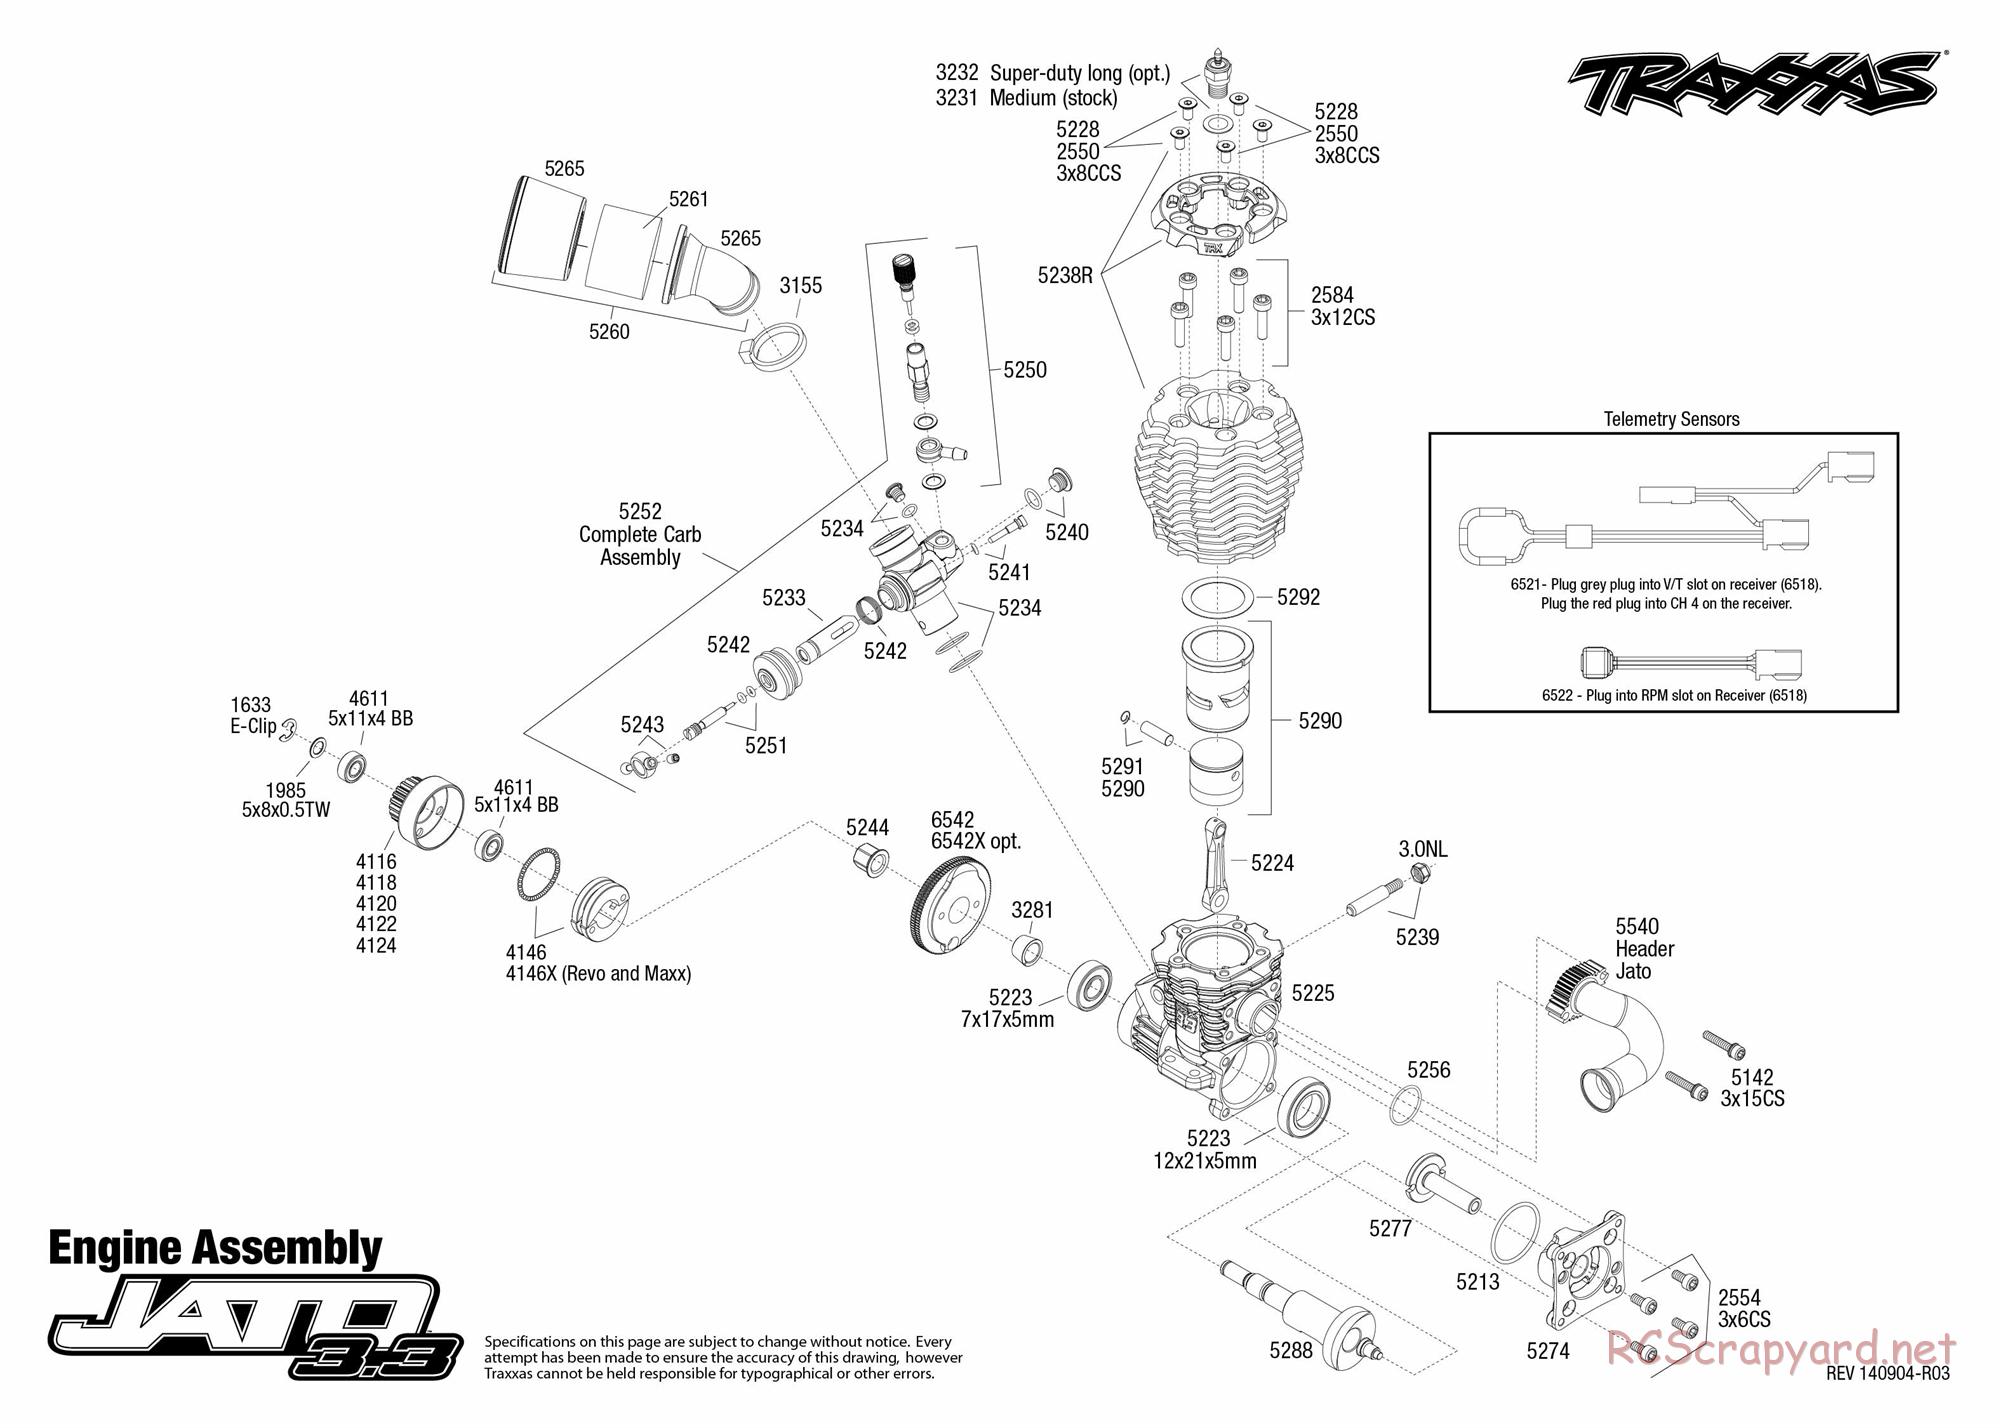 Traxxas - Jato 3.3 (2010) - Exploded Views - Page 2